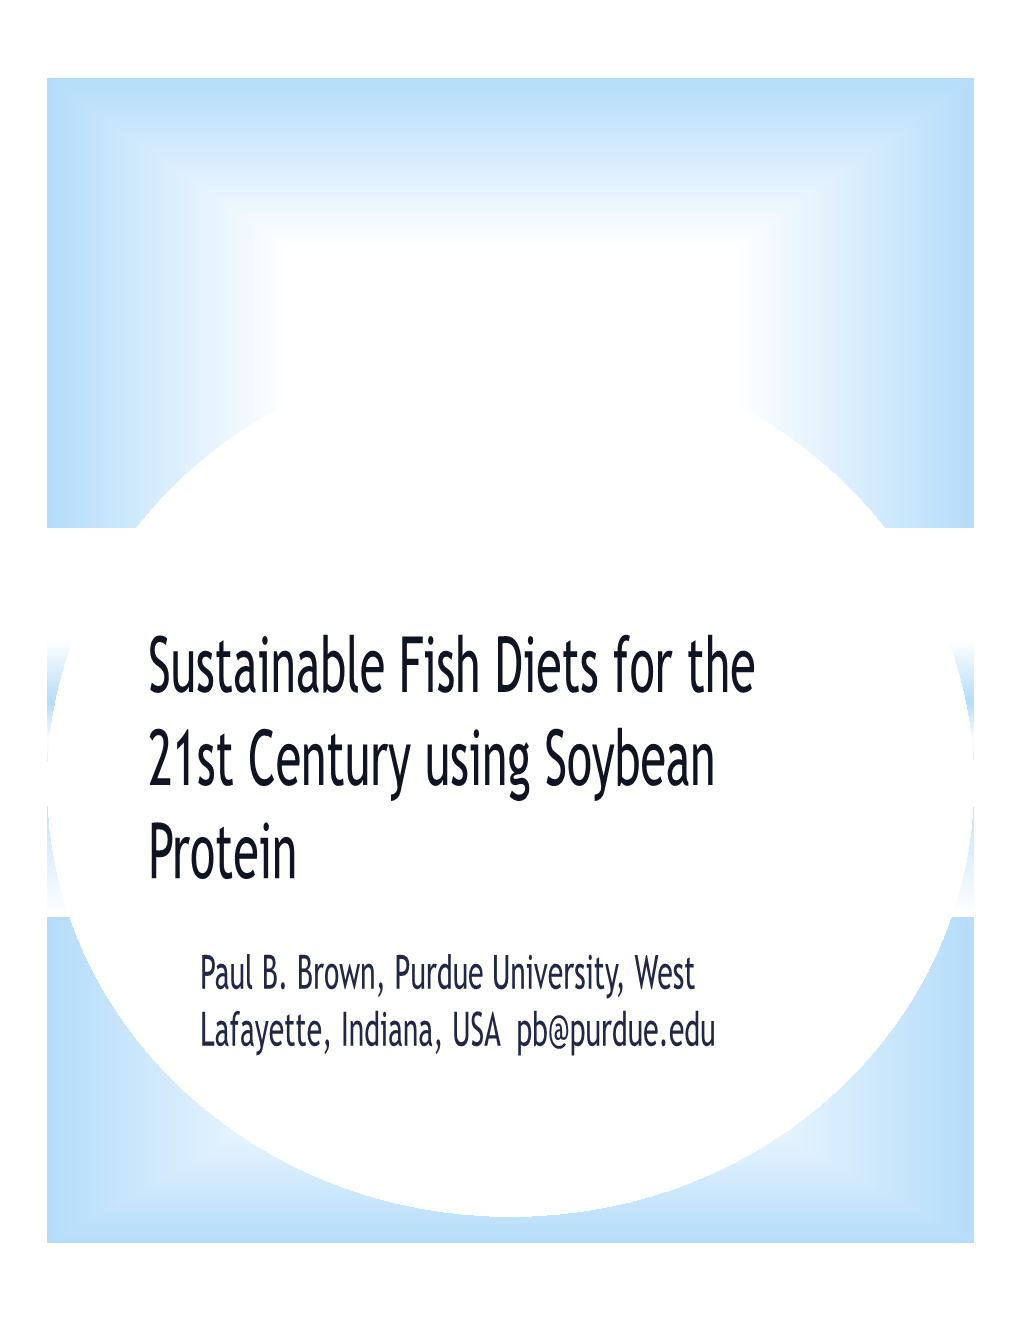 Sustainable Fish Diets for the 21St Century Using Soybean Protein